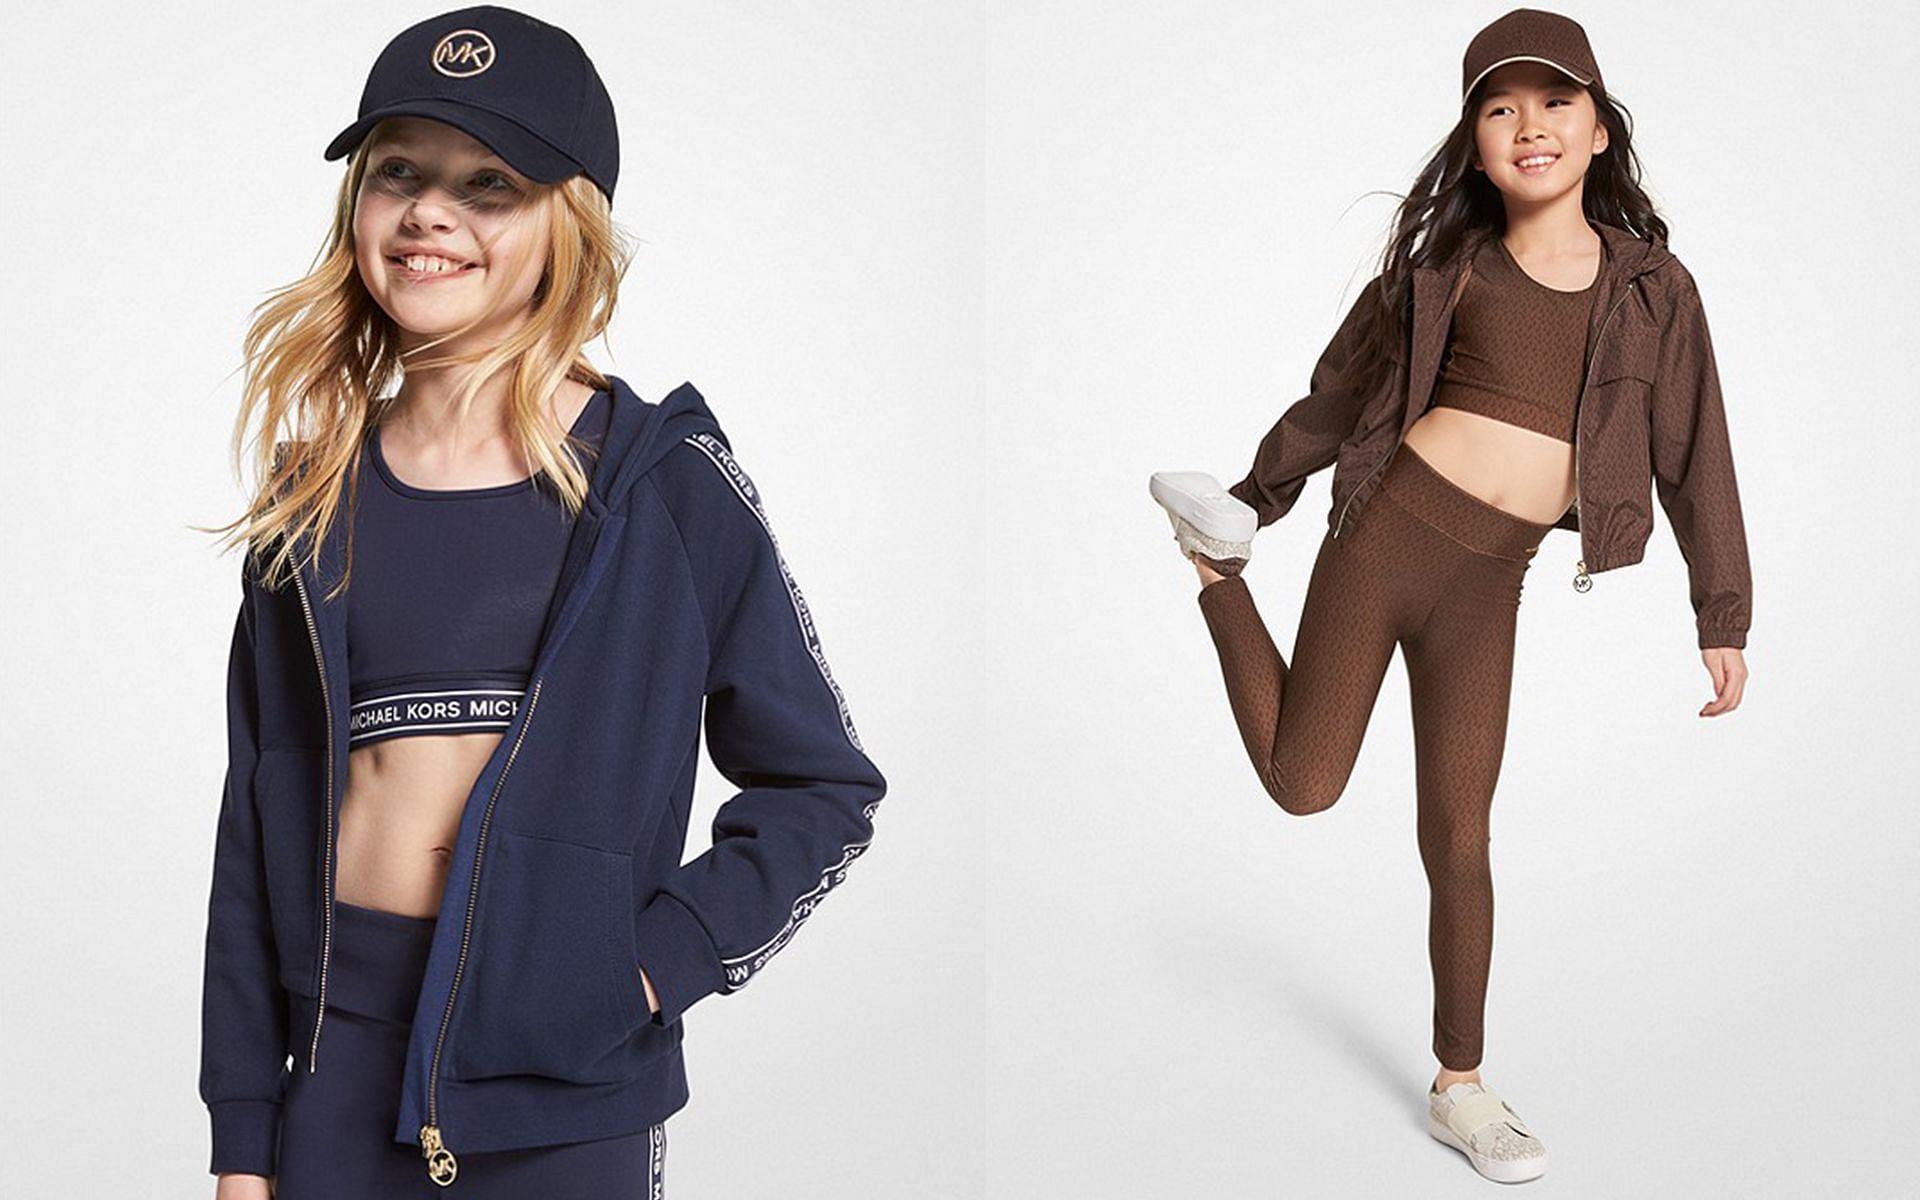 Michael Kors Kidswear debut: Where to buy, release date, price, and ...